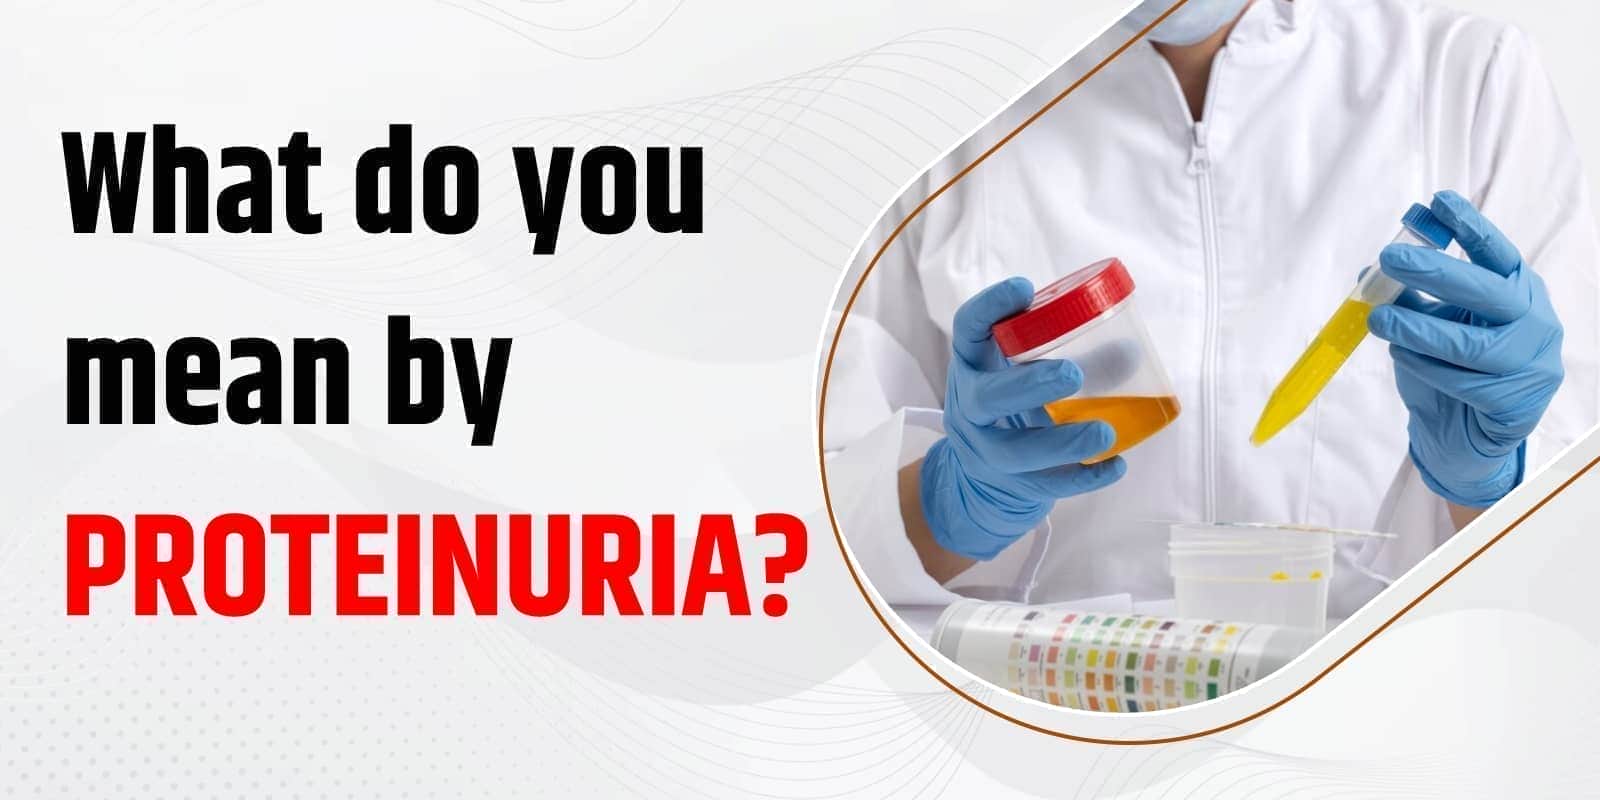 What do you mean by Proteinuria?